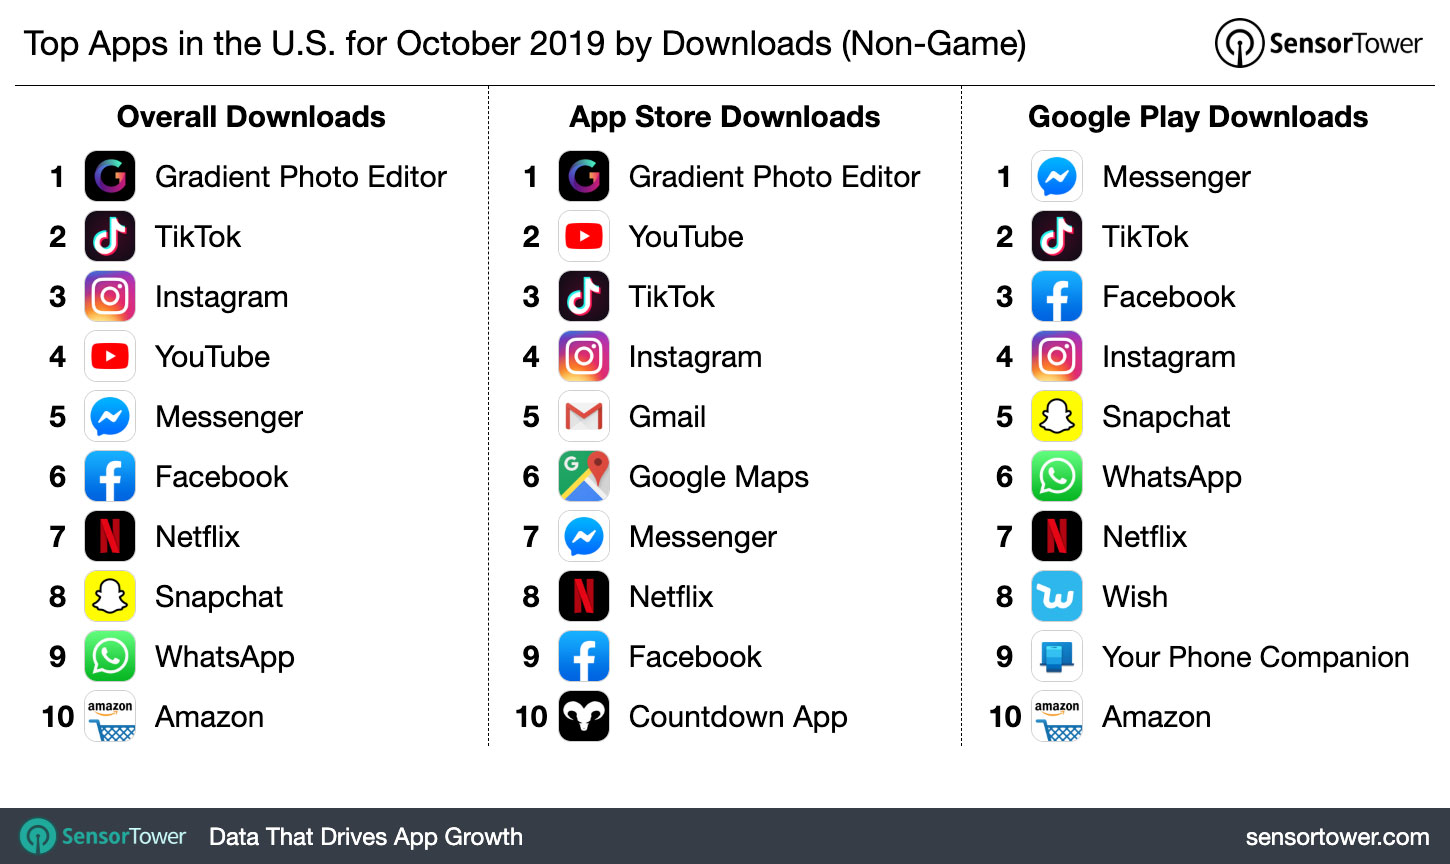 Top Apps in the U.S. for October 2019 by Downloads